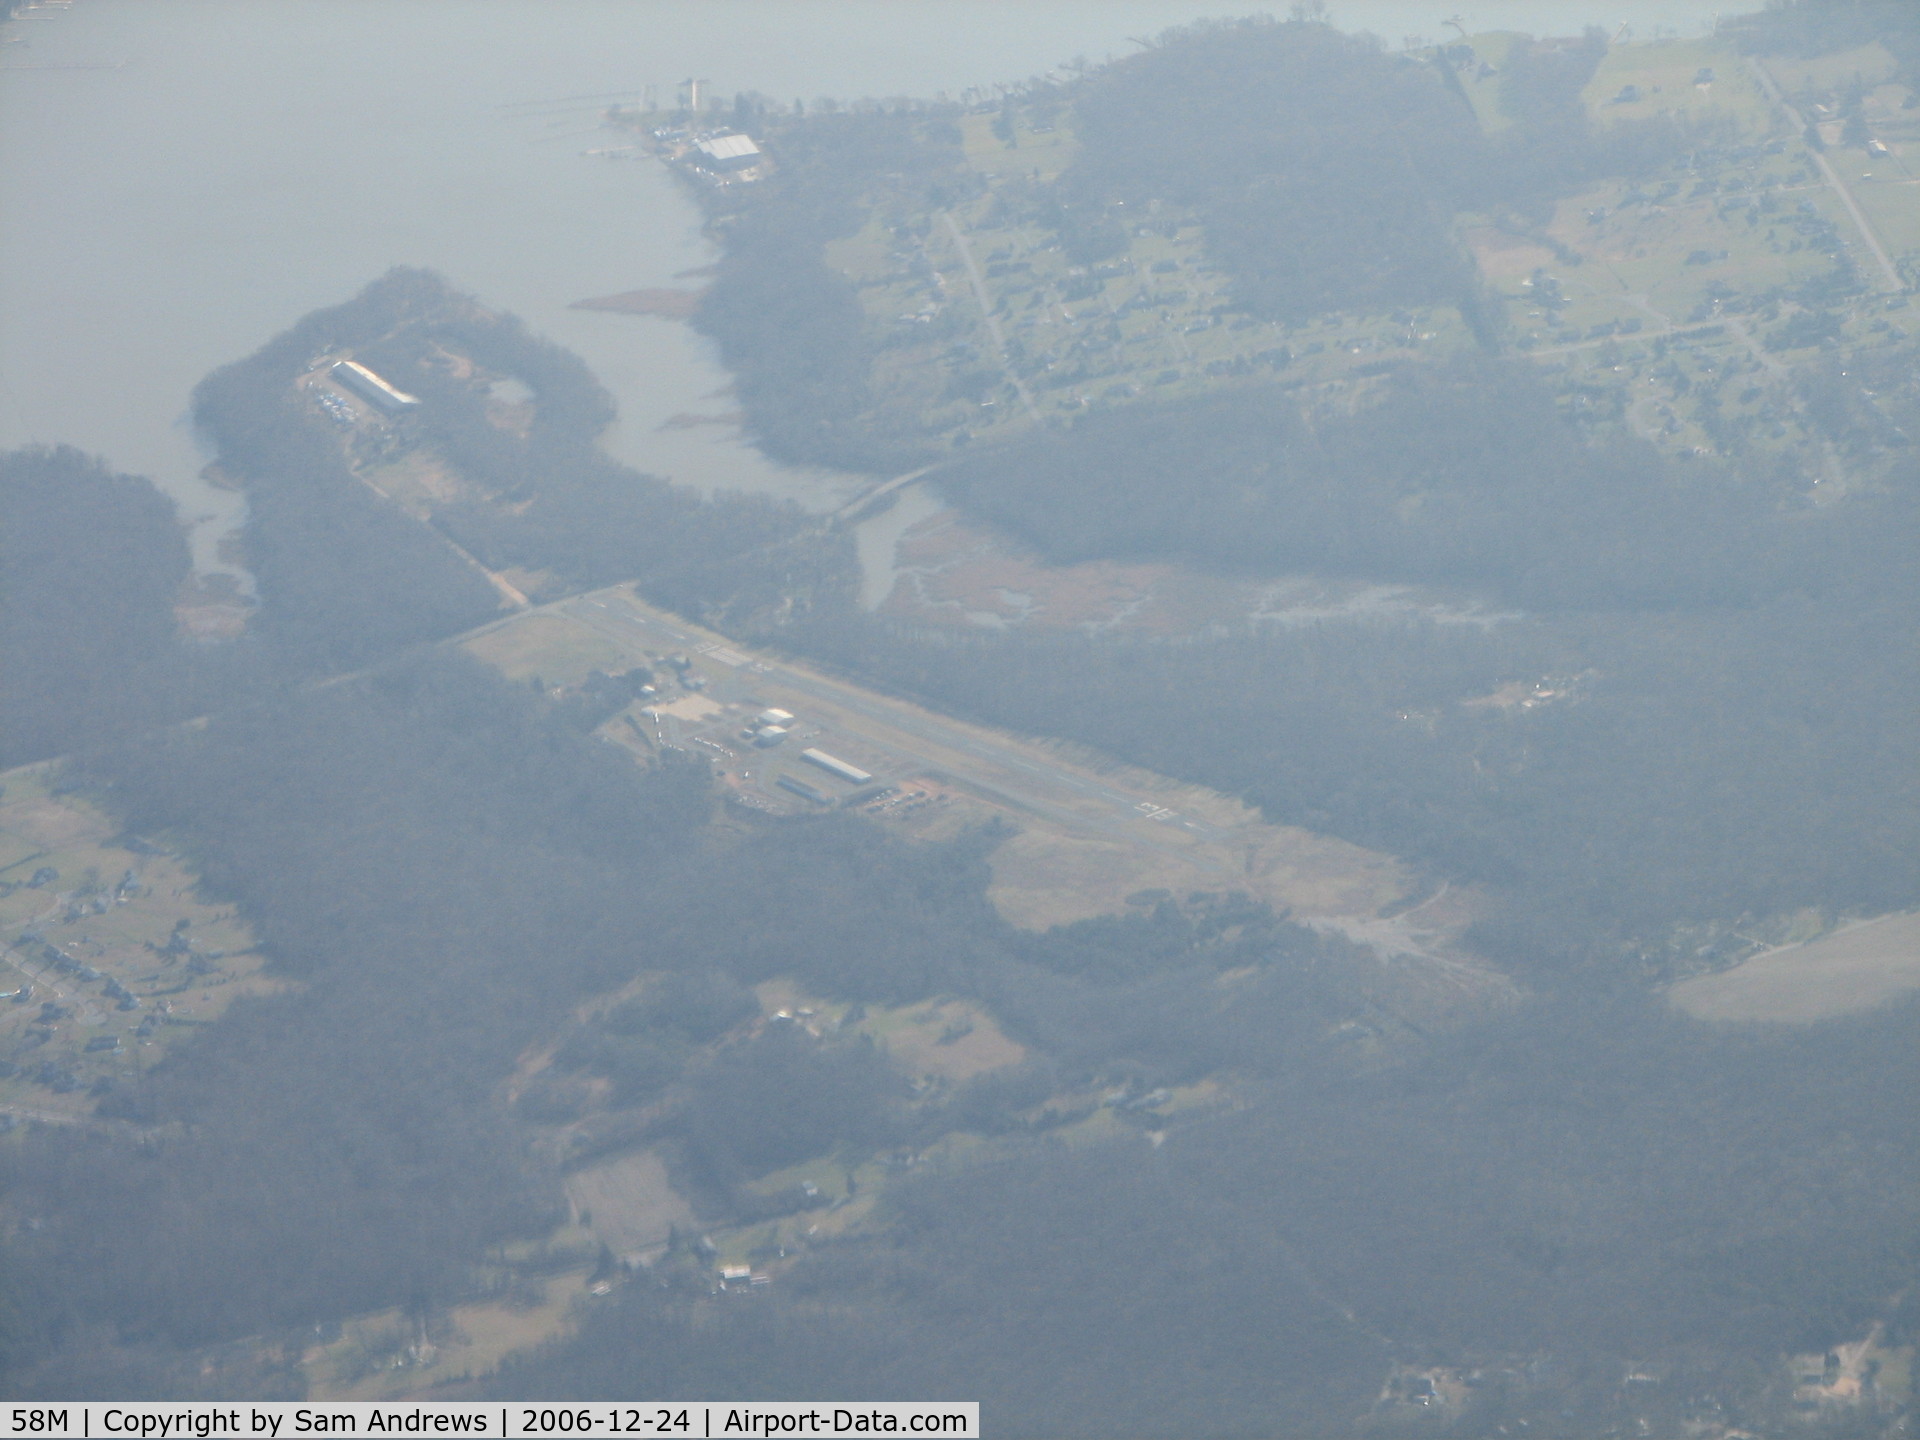 Cecil County Airport (58M) - Flying over enroute from PHL to DCA 10,000 ft